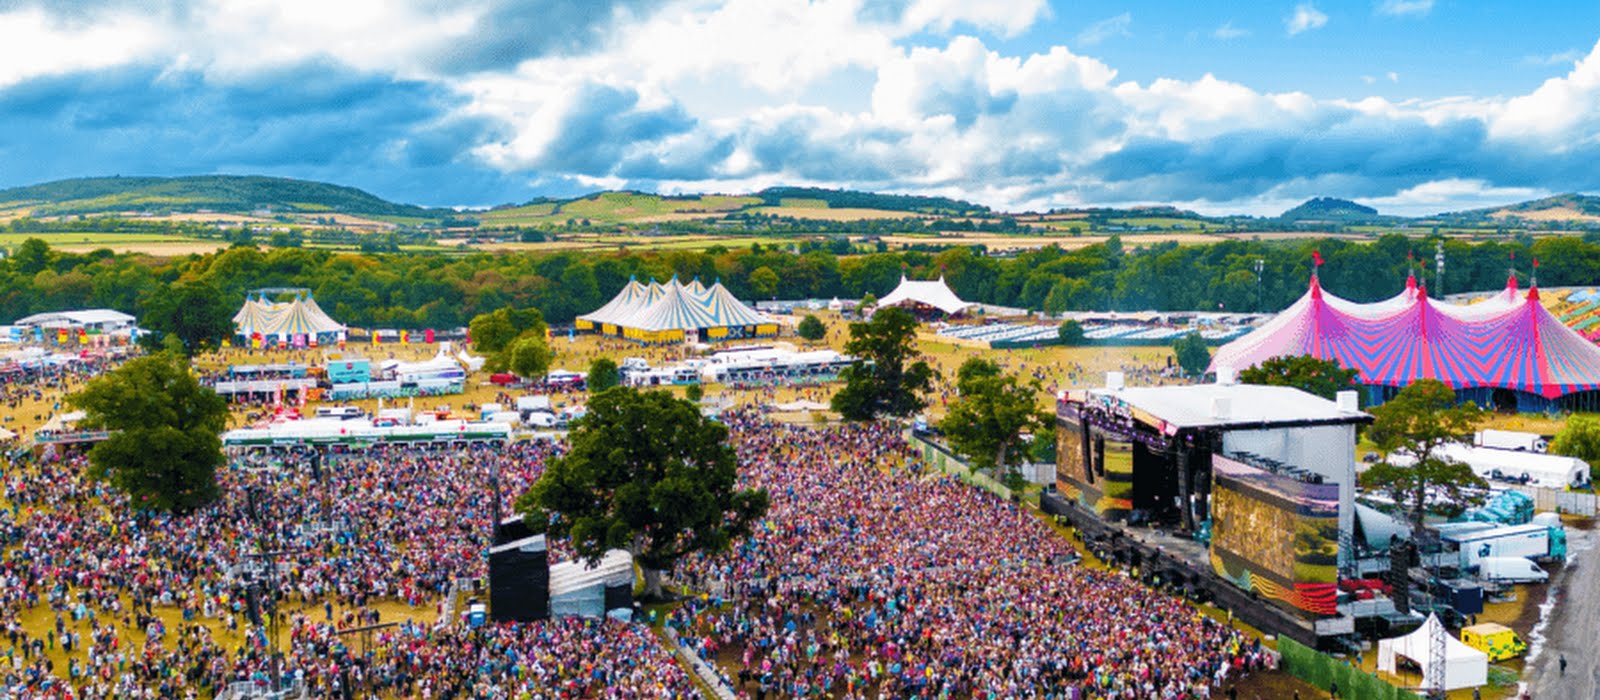 9 things not to be missed at Electric Picnic this year